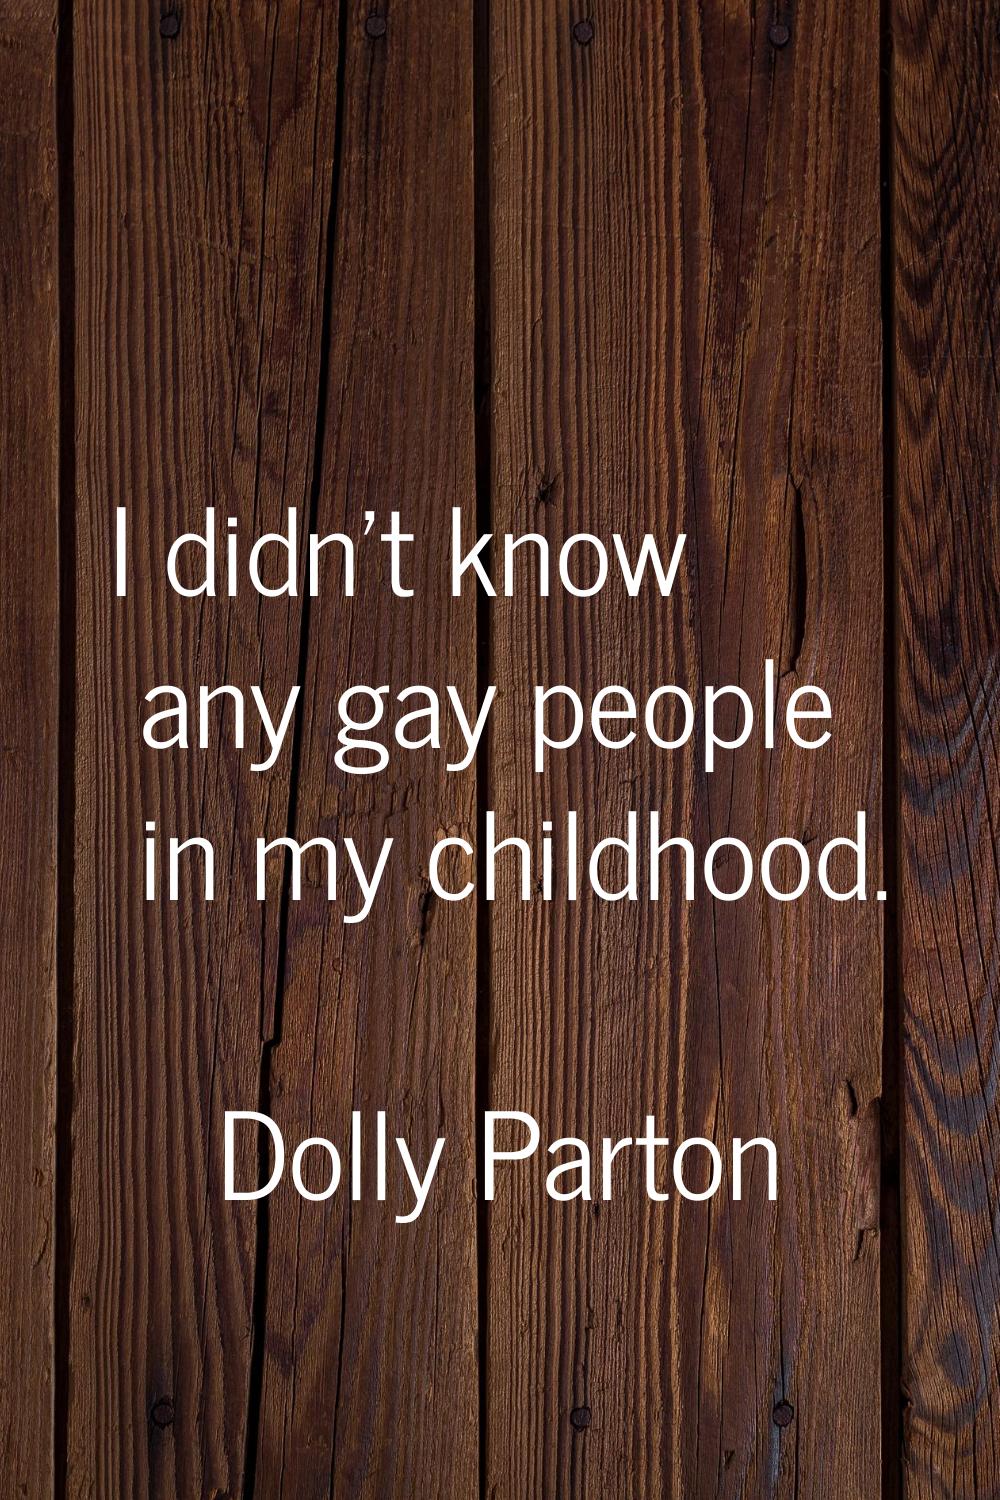 I didn't know any gay people in my childhood.